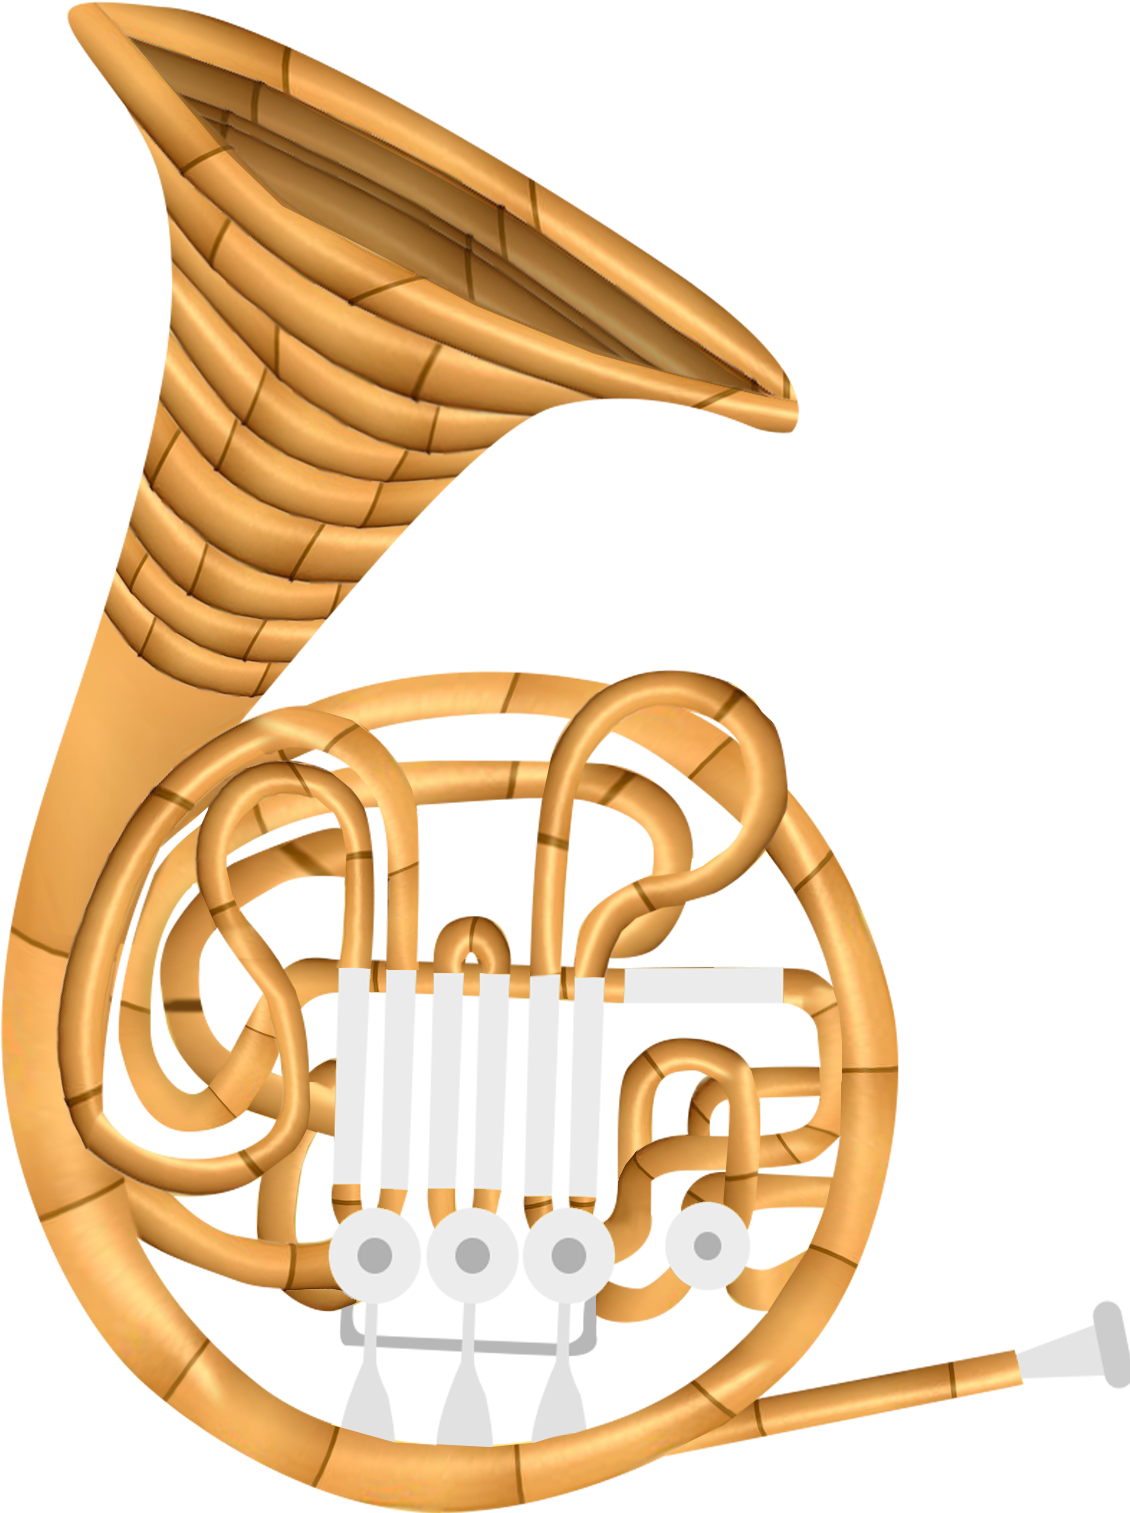 A Circular Brass Musical Instrument With A Large Opening - Illustration (1144x1981)